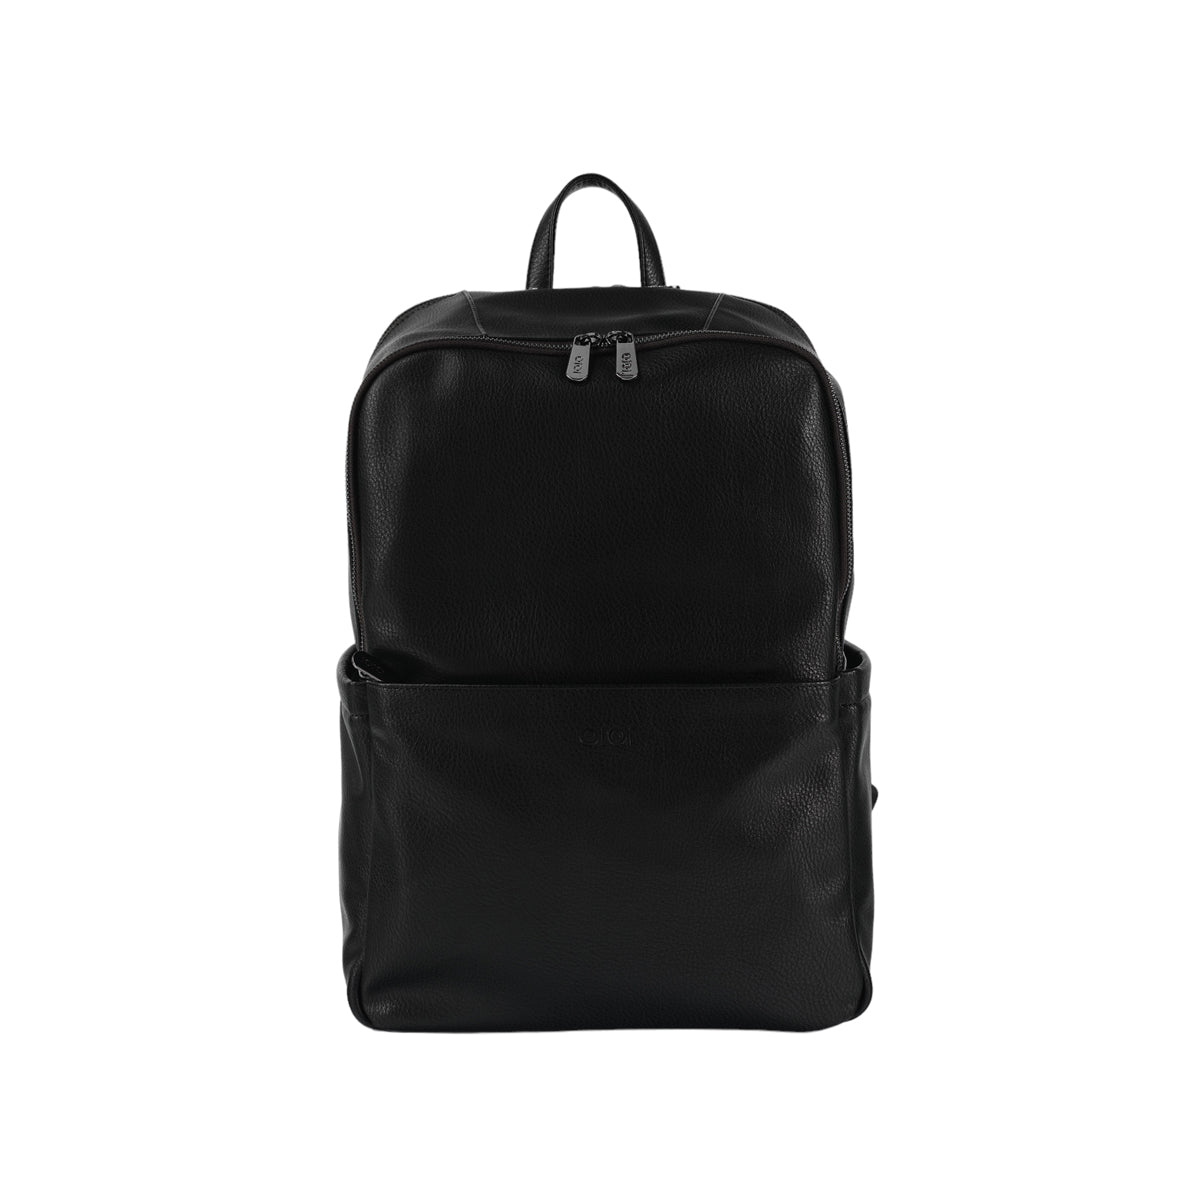 OiOi Faux Leather Multitasker Nappy Backpack - Black